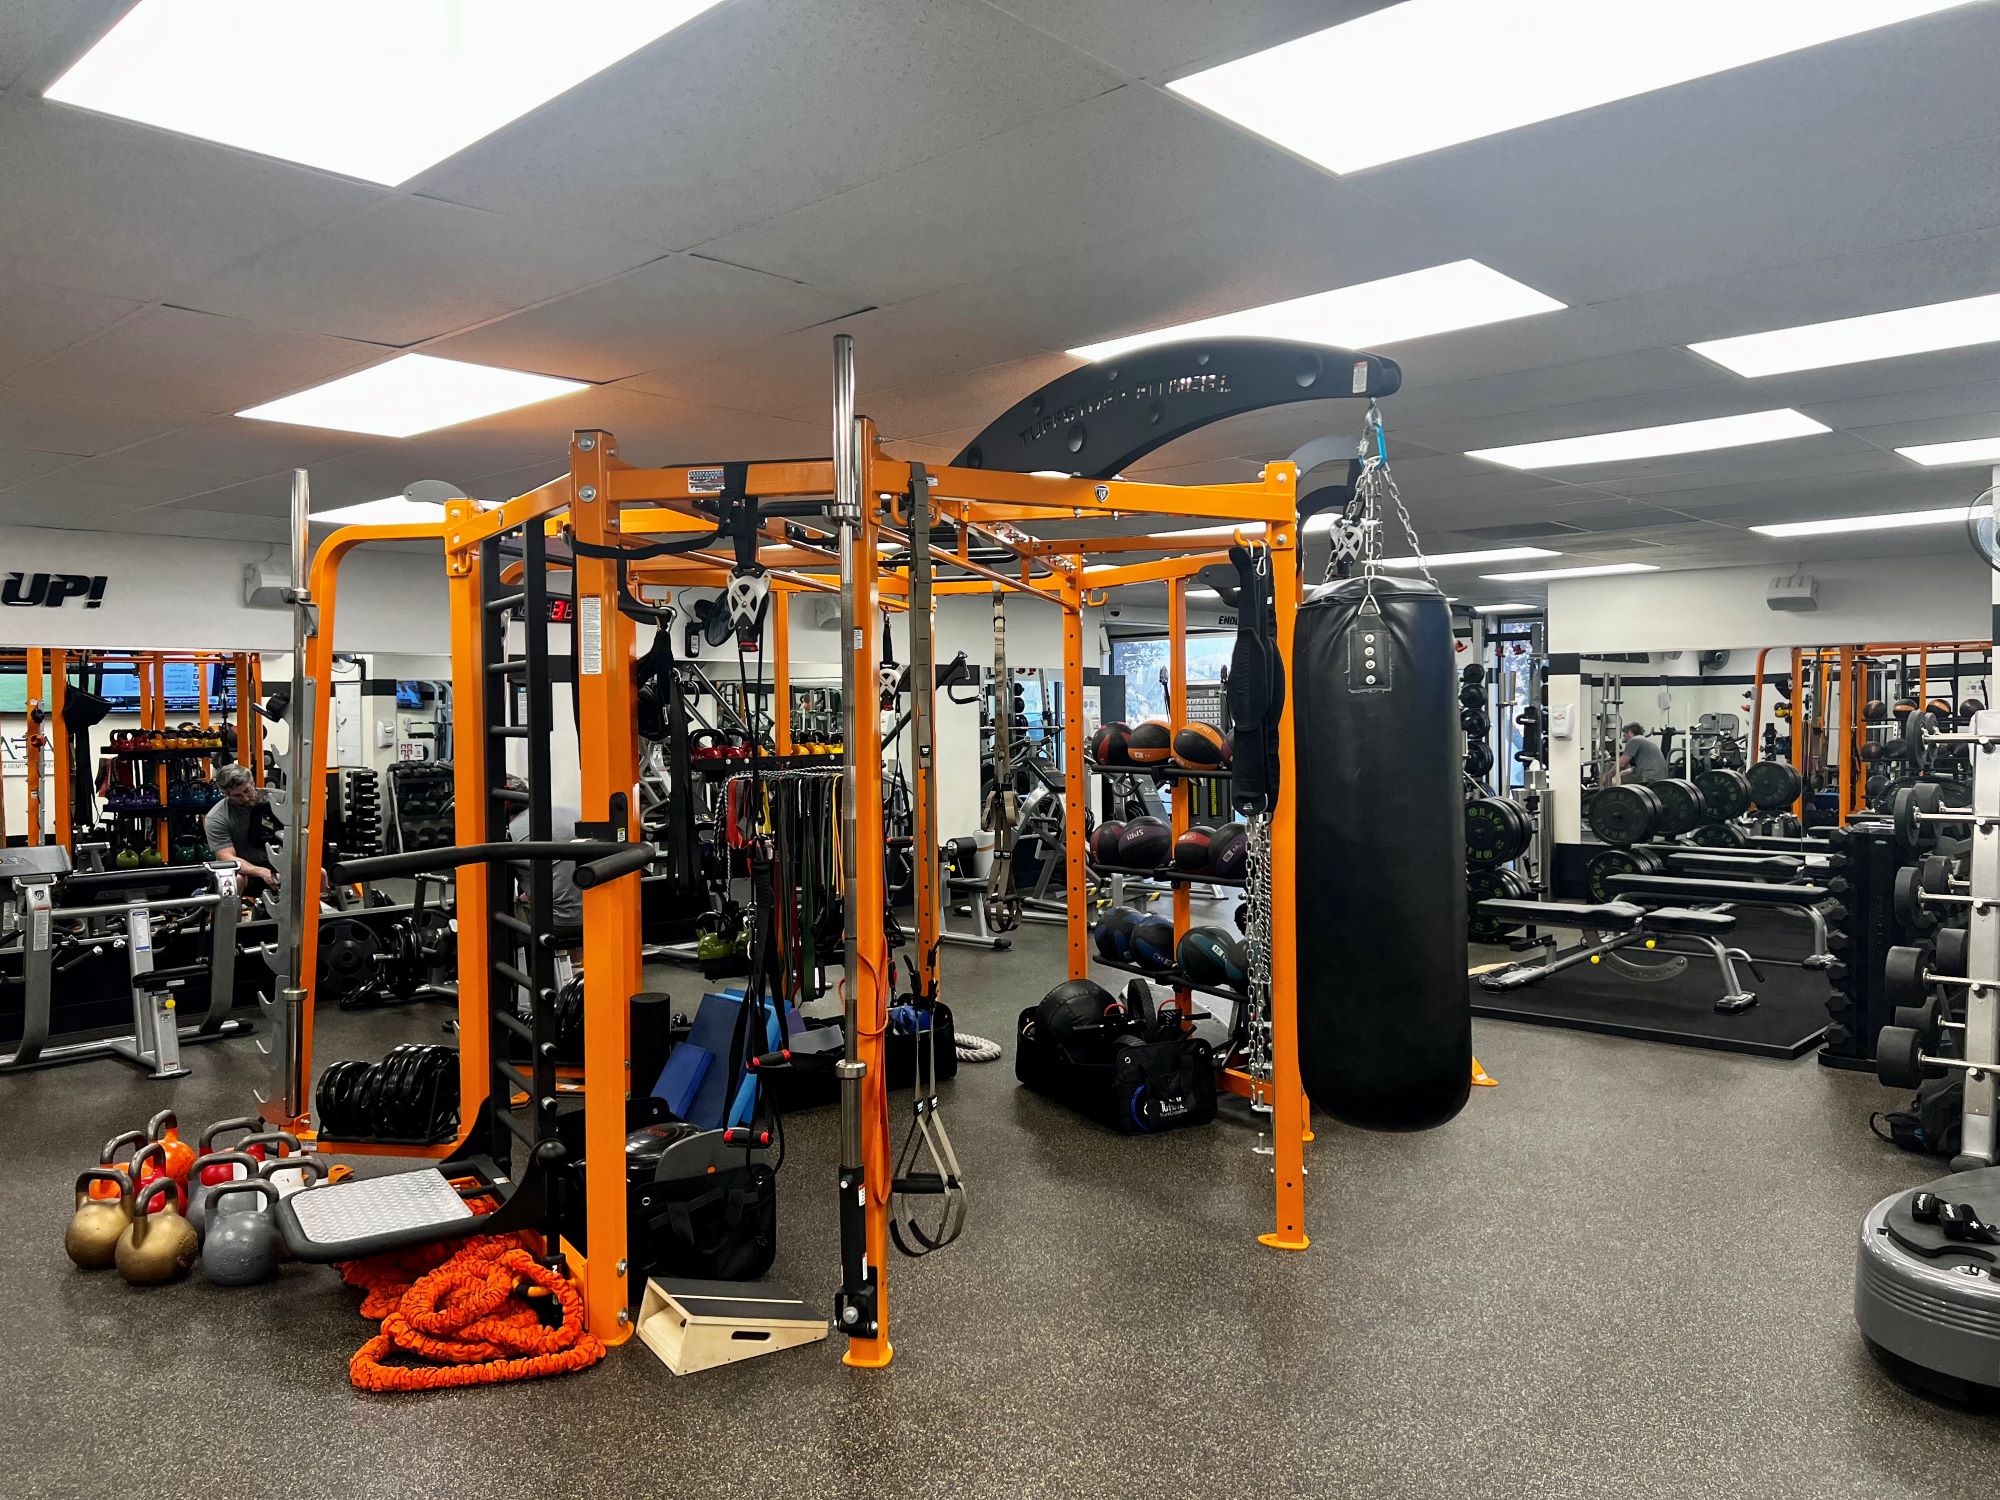 Jungle gym and other equipment inside AFAC gym in Thornton, Colorado.